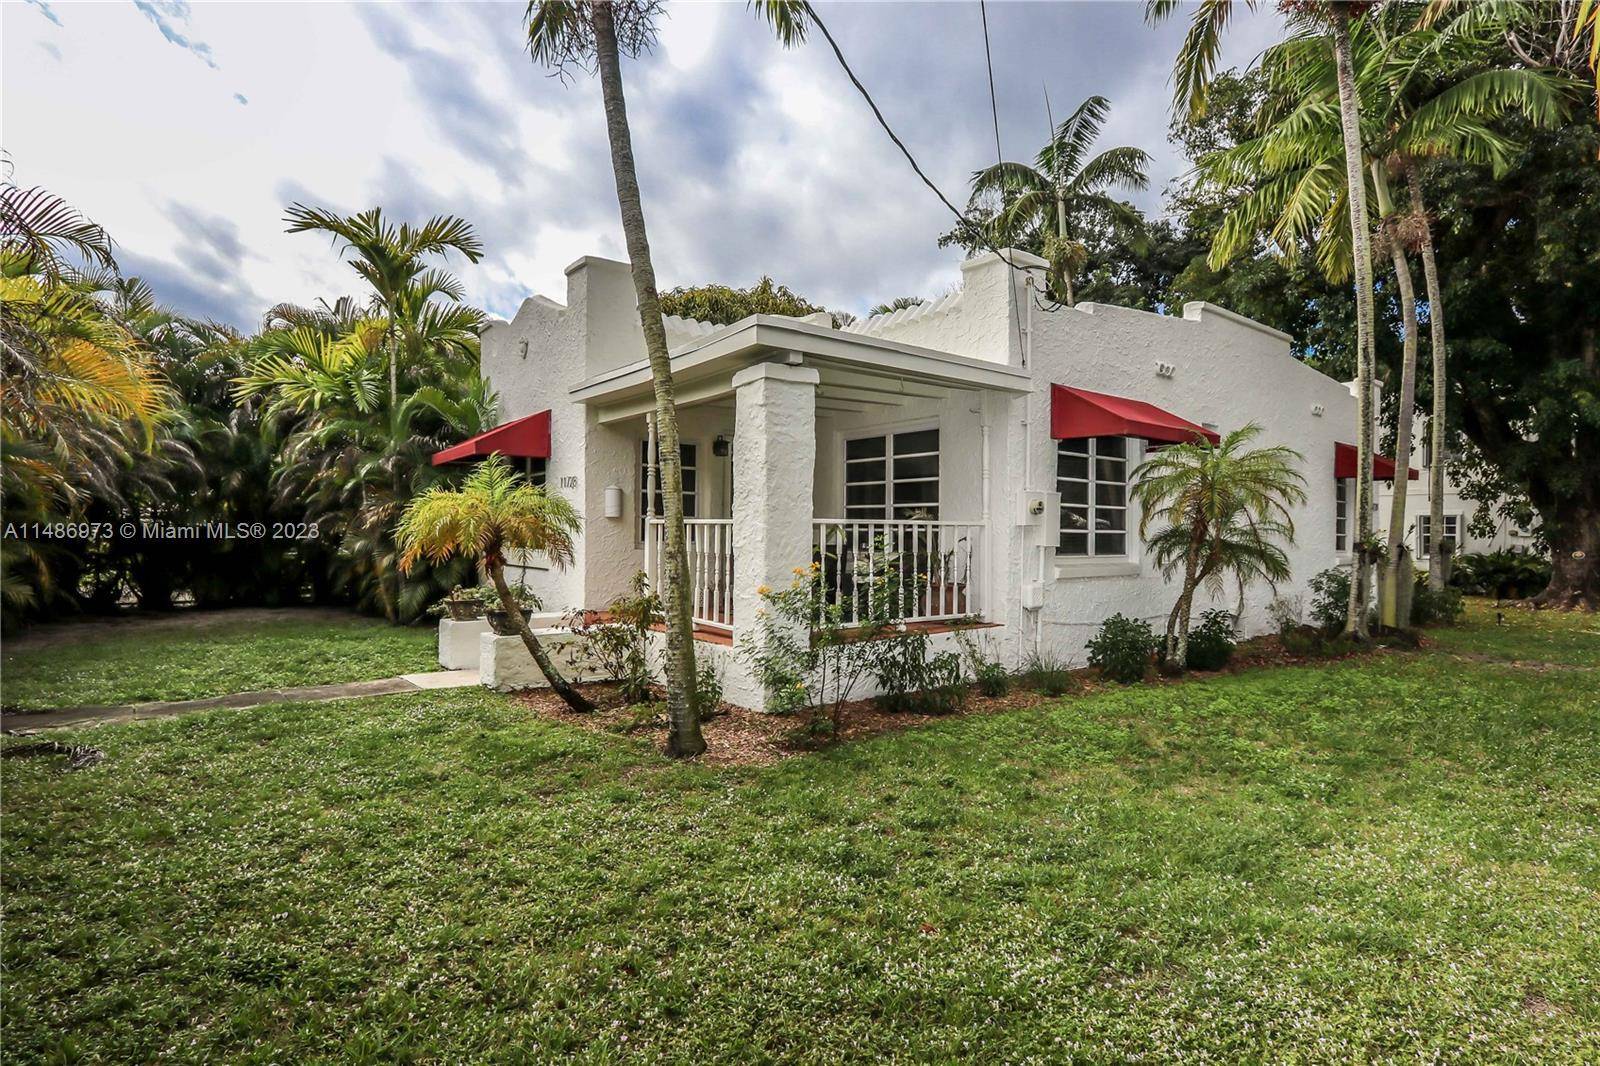 1920s 2Br's 1 Bath with pool surrounded by a Tropical Oasis on Stunning Corner Lot in Biscayne Park.